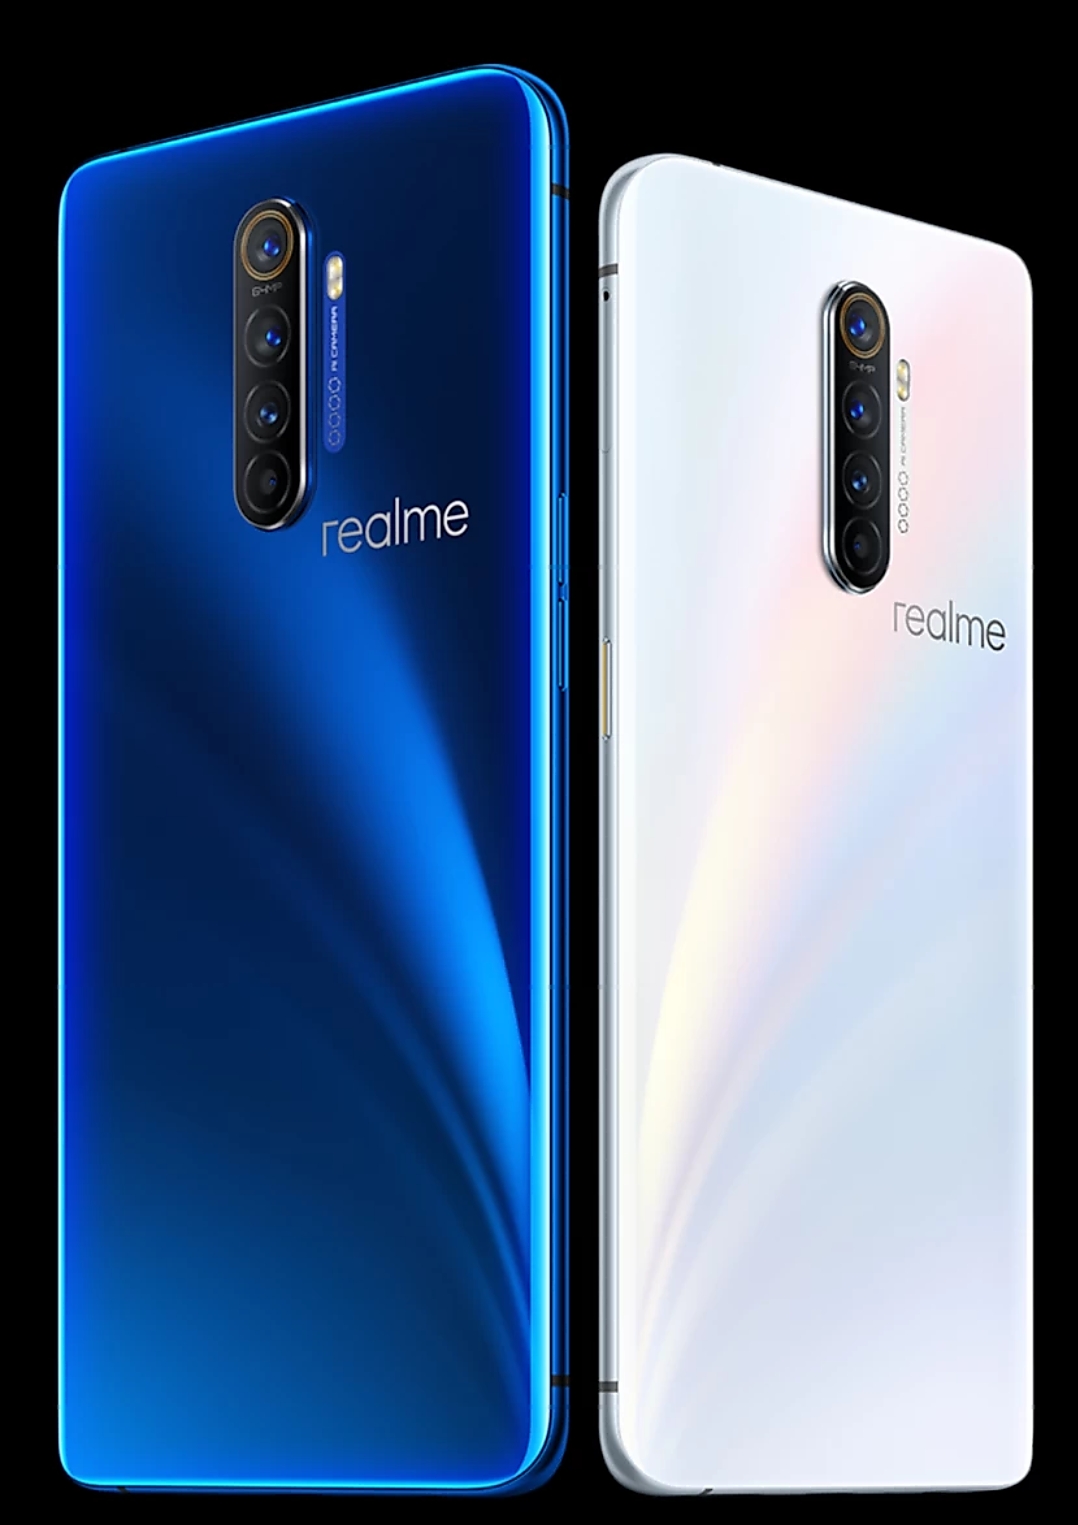 Realme X2 Pro price smartphone launched in India, price starts at Rs